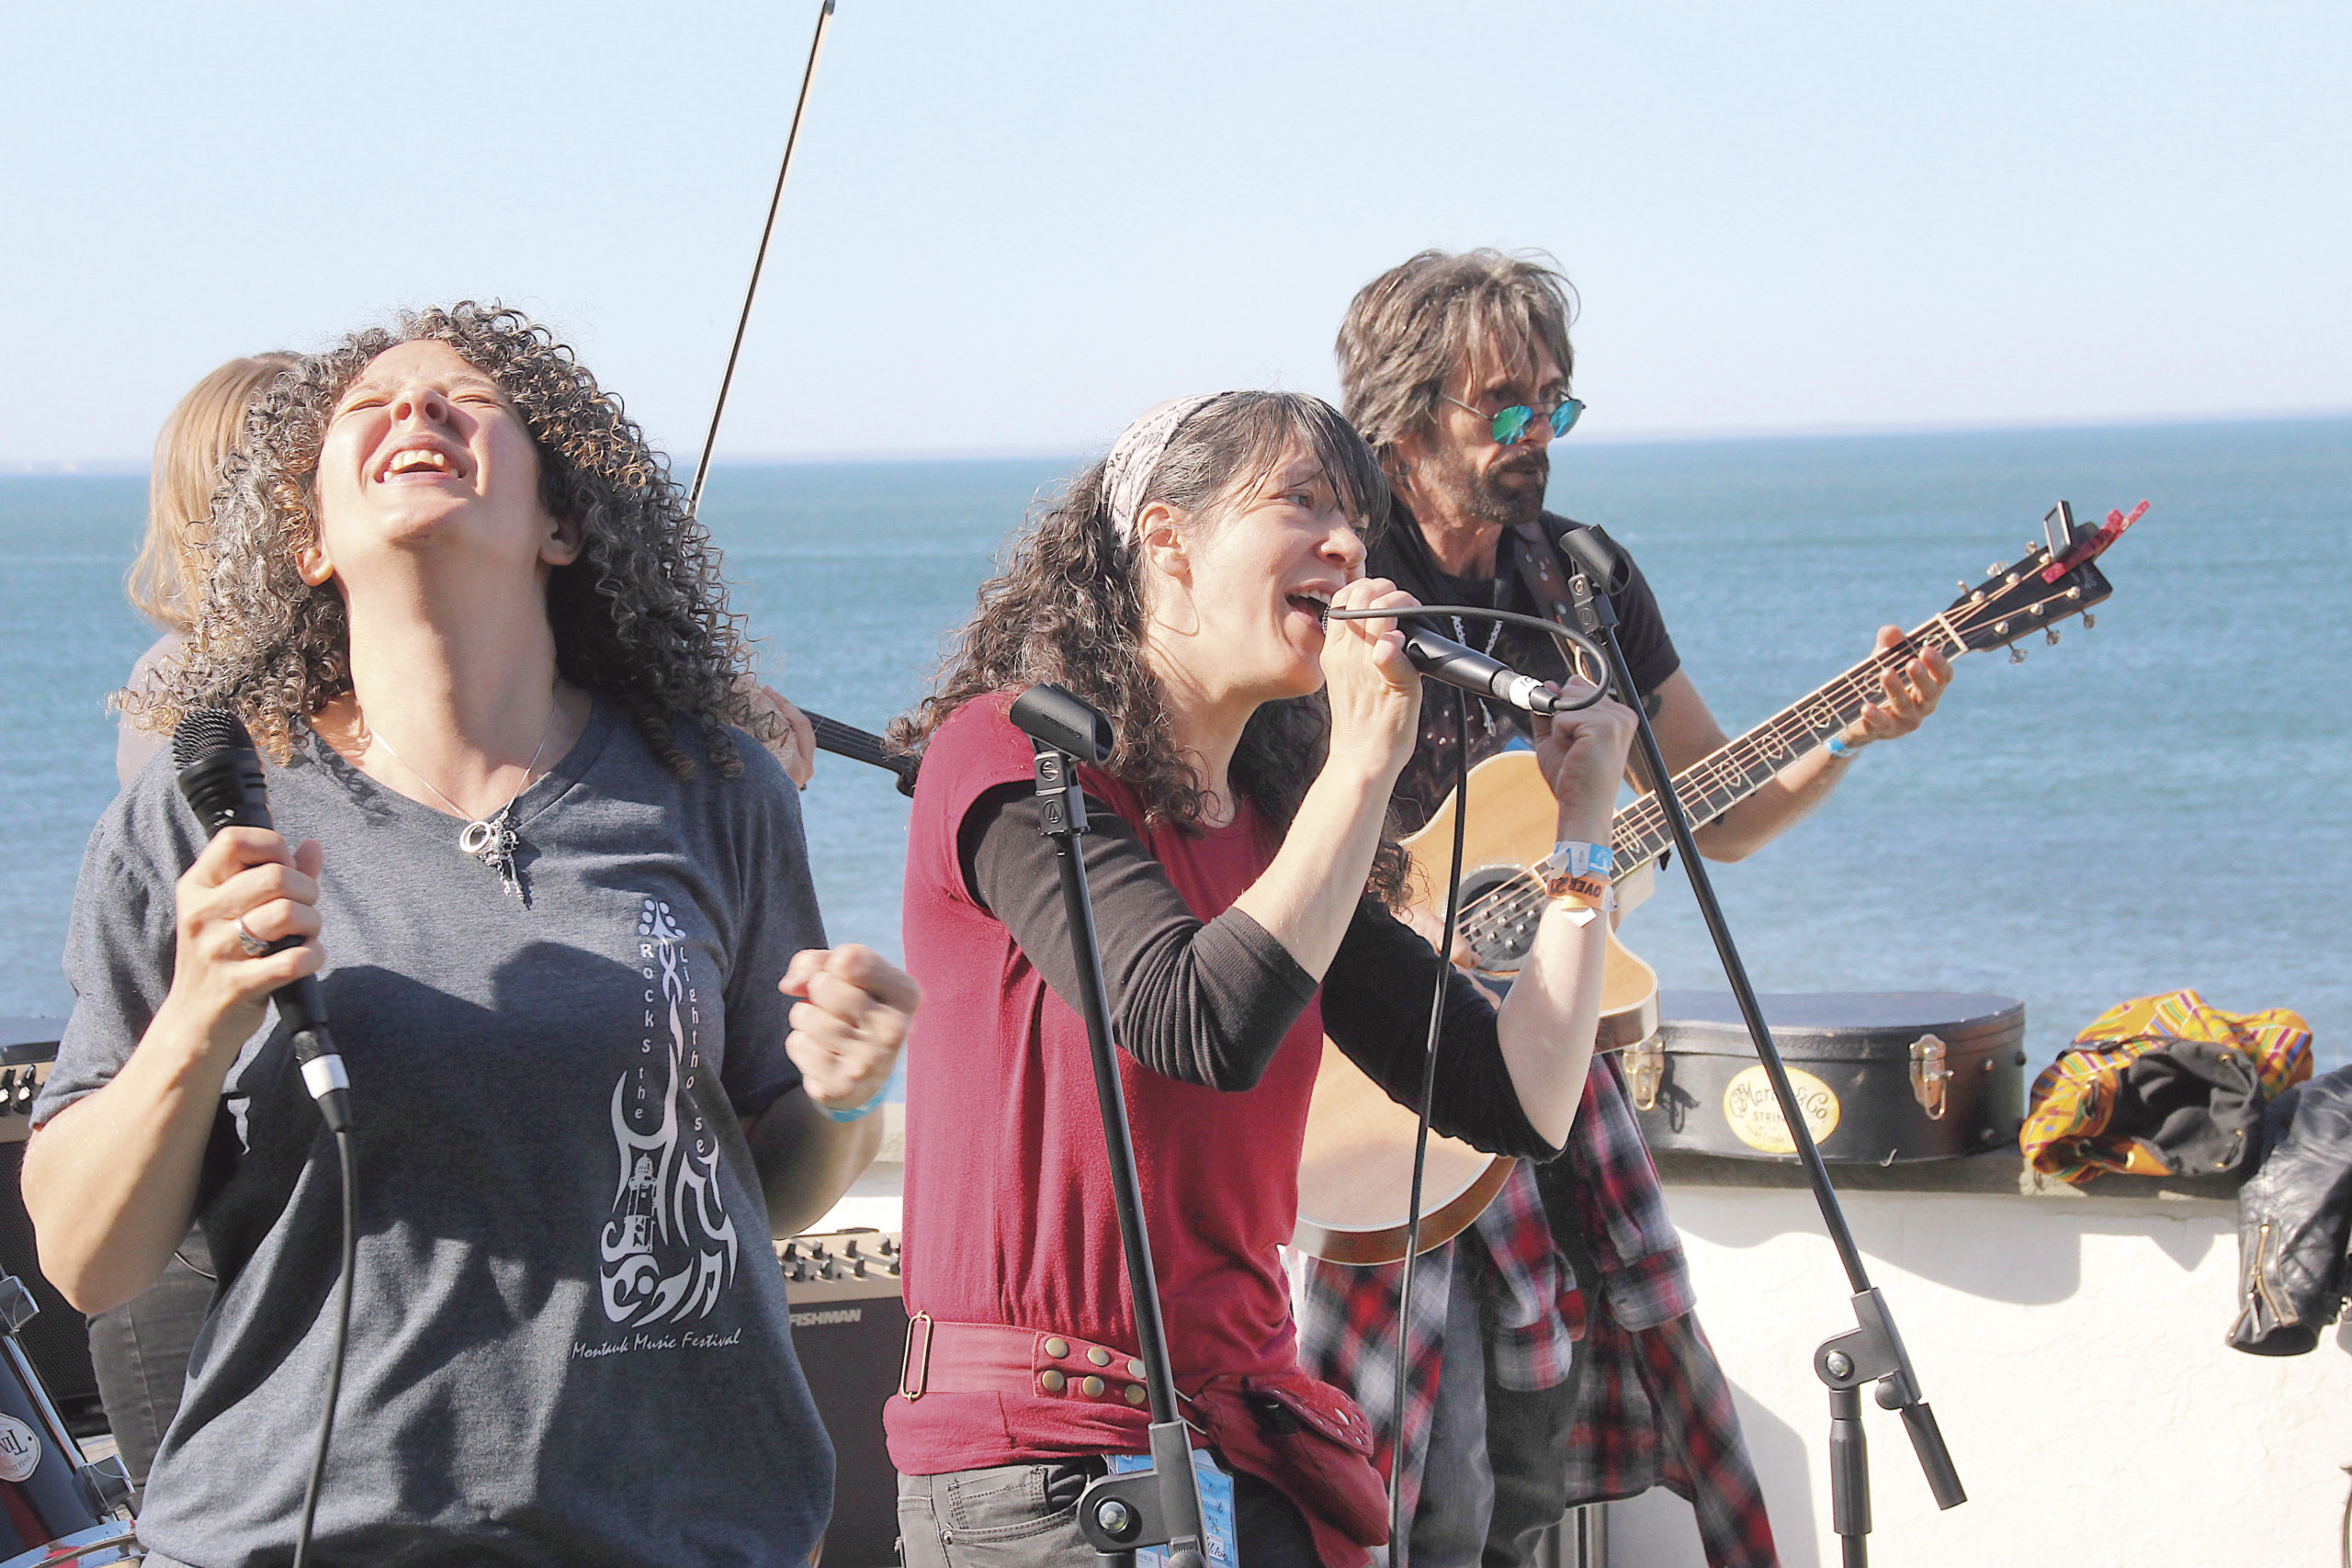 The Point Was Jumpin’ 
May 22 -- Tuatha Dea performs at the Lighthouse Cafe as part of the Montauk Music Festival